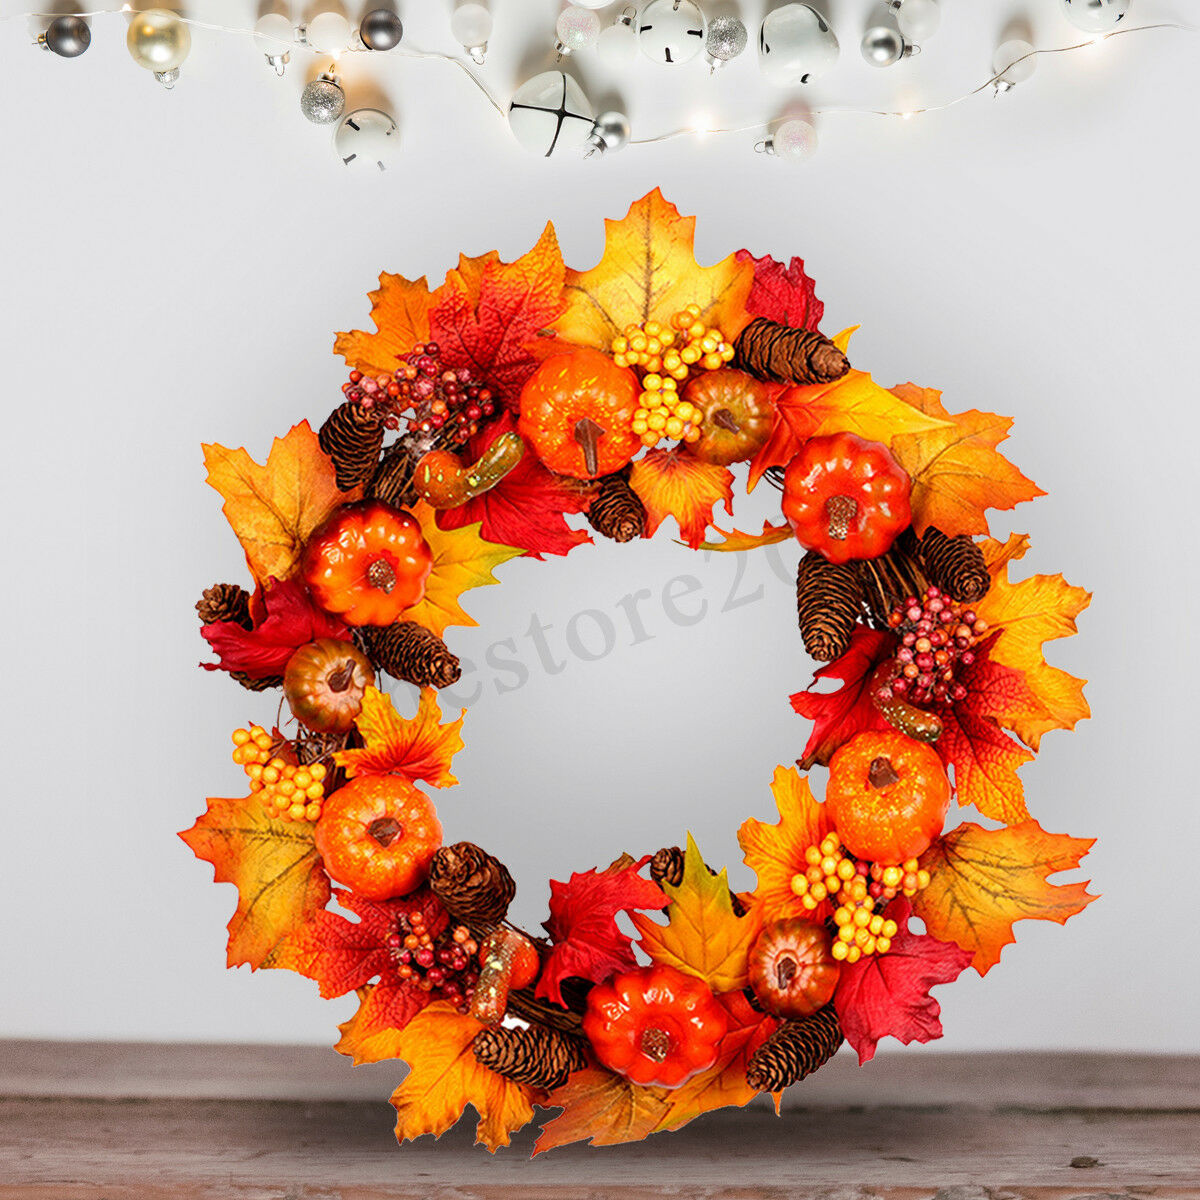 4560cm-Wreath-Garland-Maple-Leaves-Pumpkin-Door-For-Christmas-Party-Decorations-1637102-1